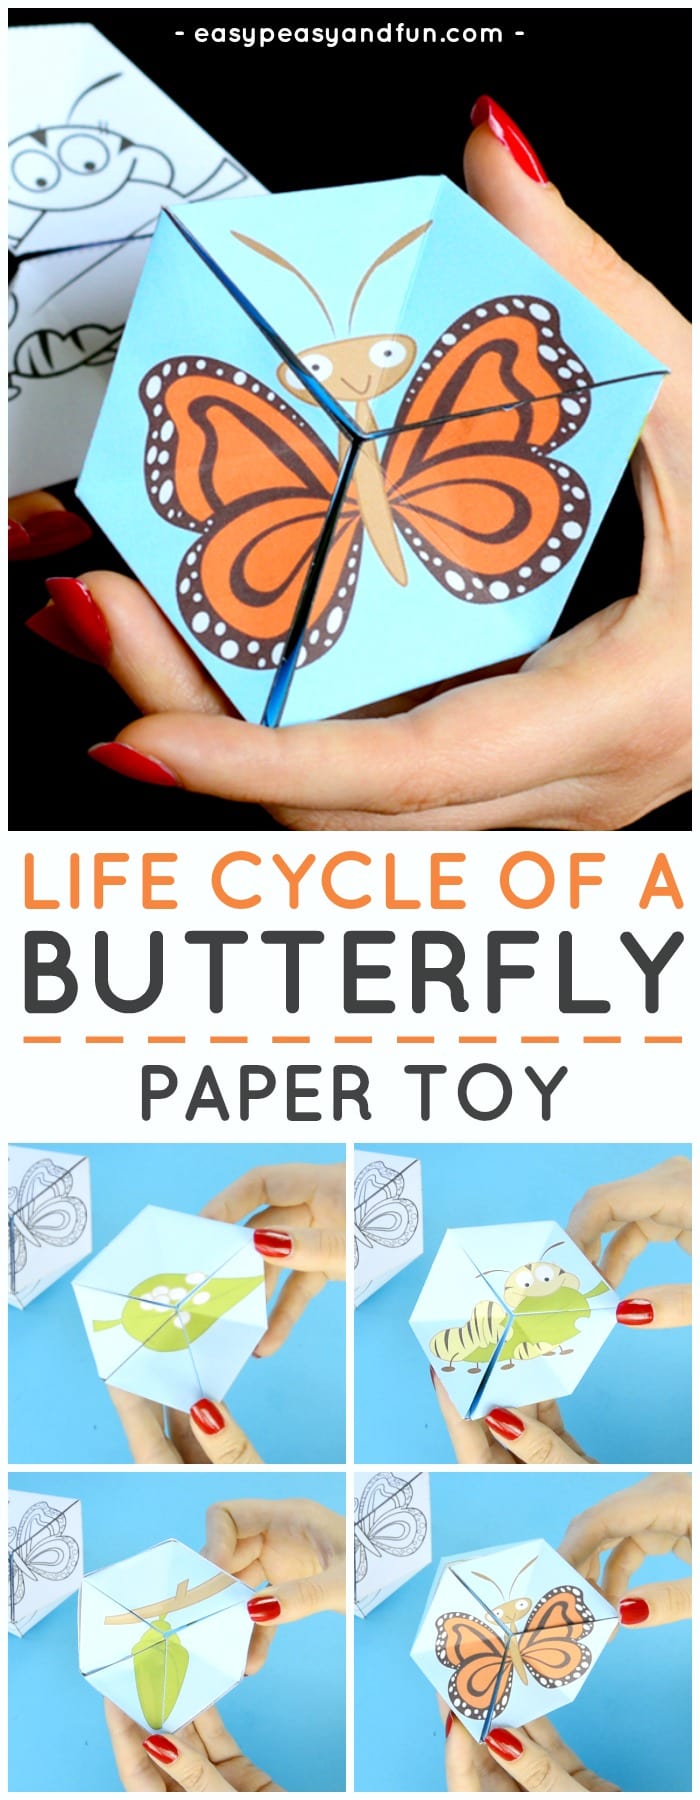 Butterfly life cycle paper toy craft